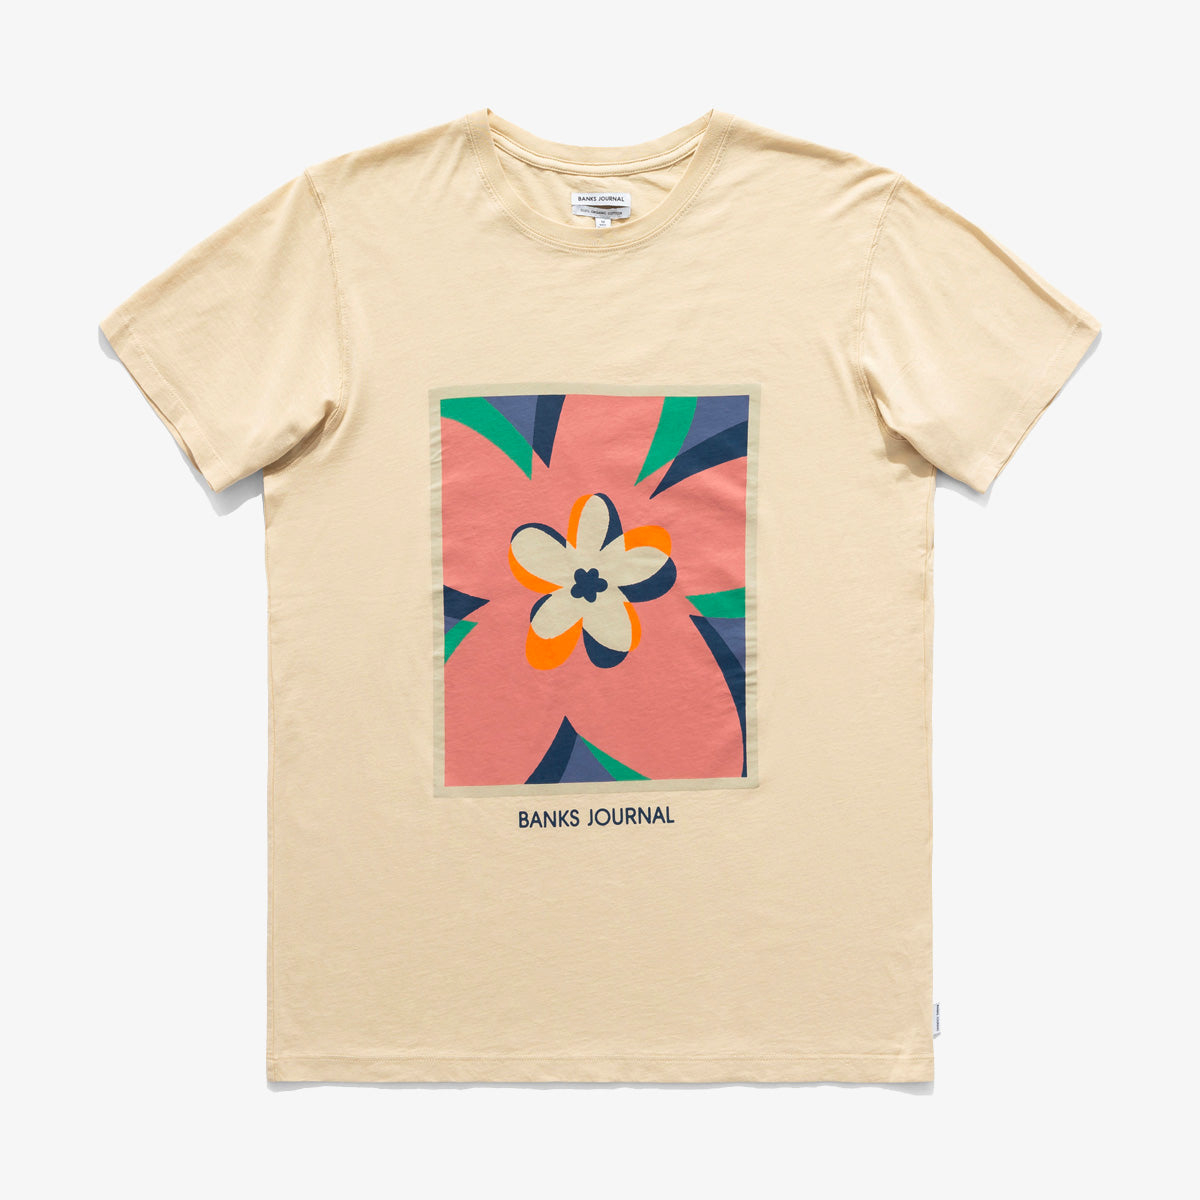 Candy Faded Tee Shirt